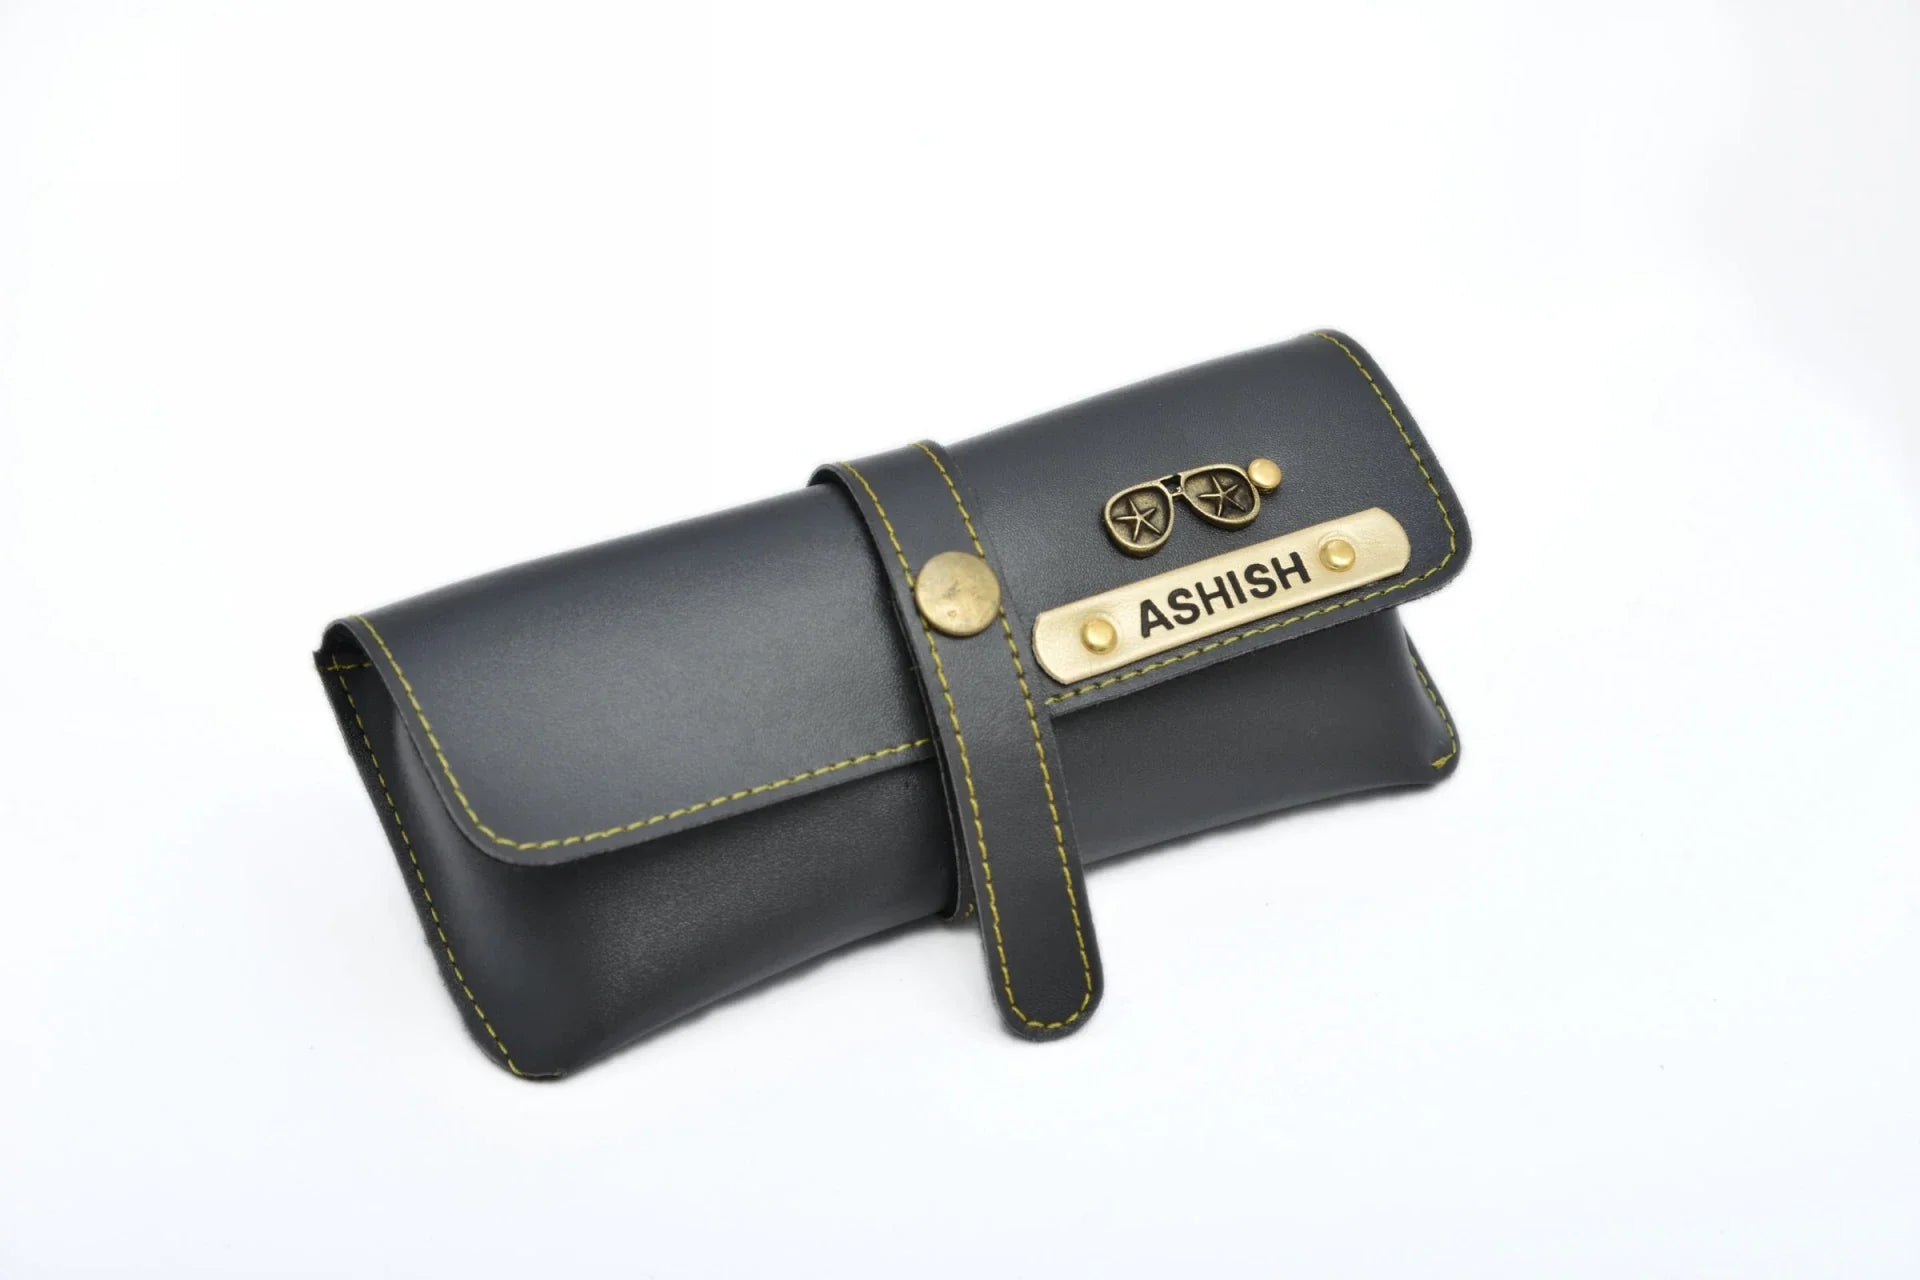 Go classy with this stylish sunglasses pouch that protects your eyewear from any scratch, strain or damage